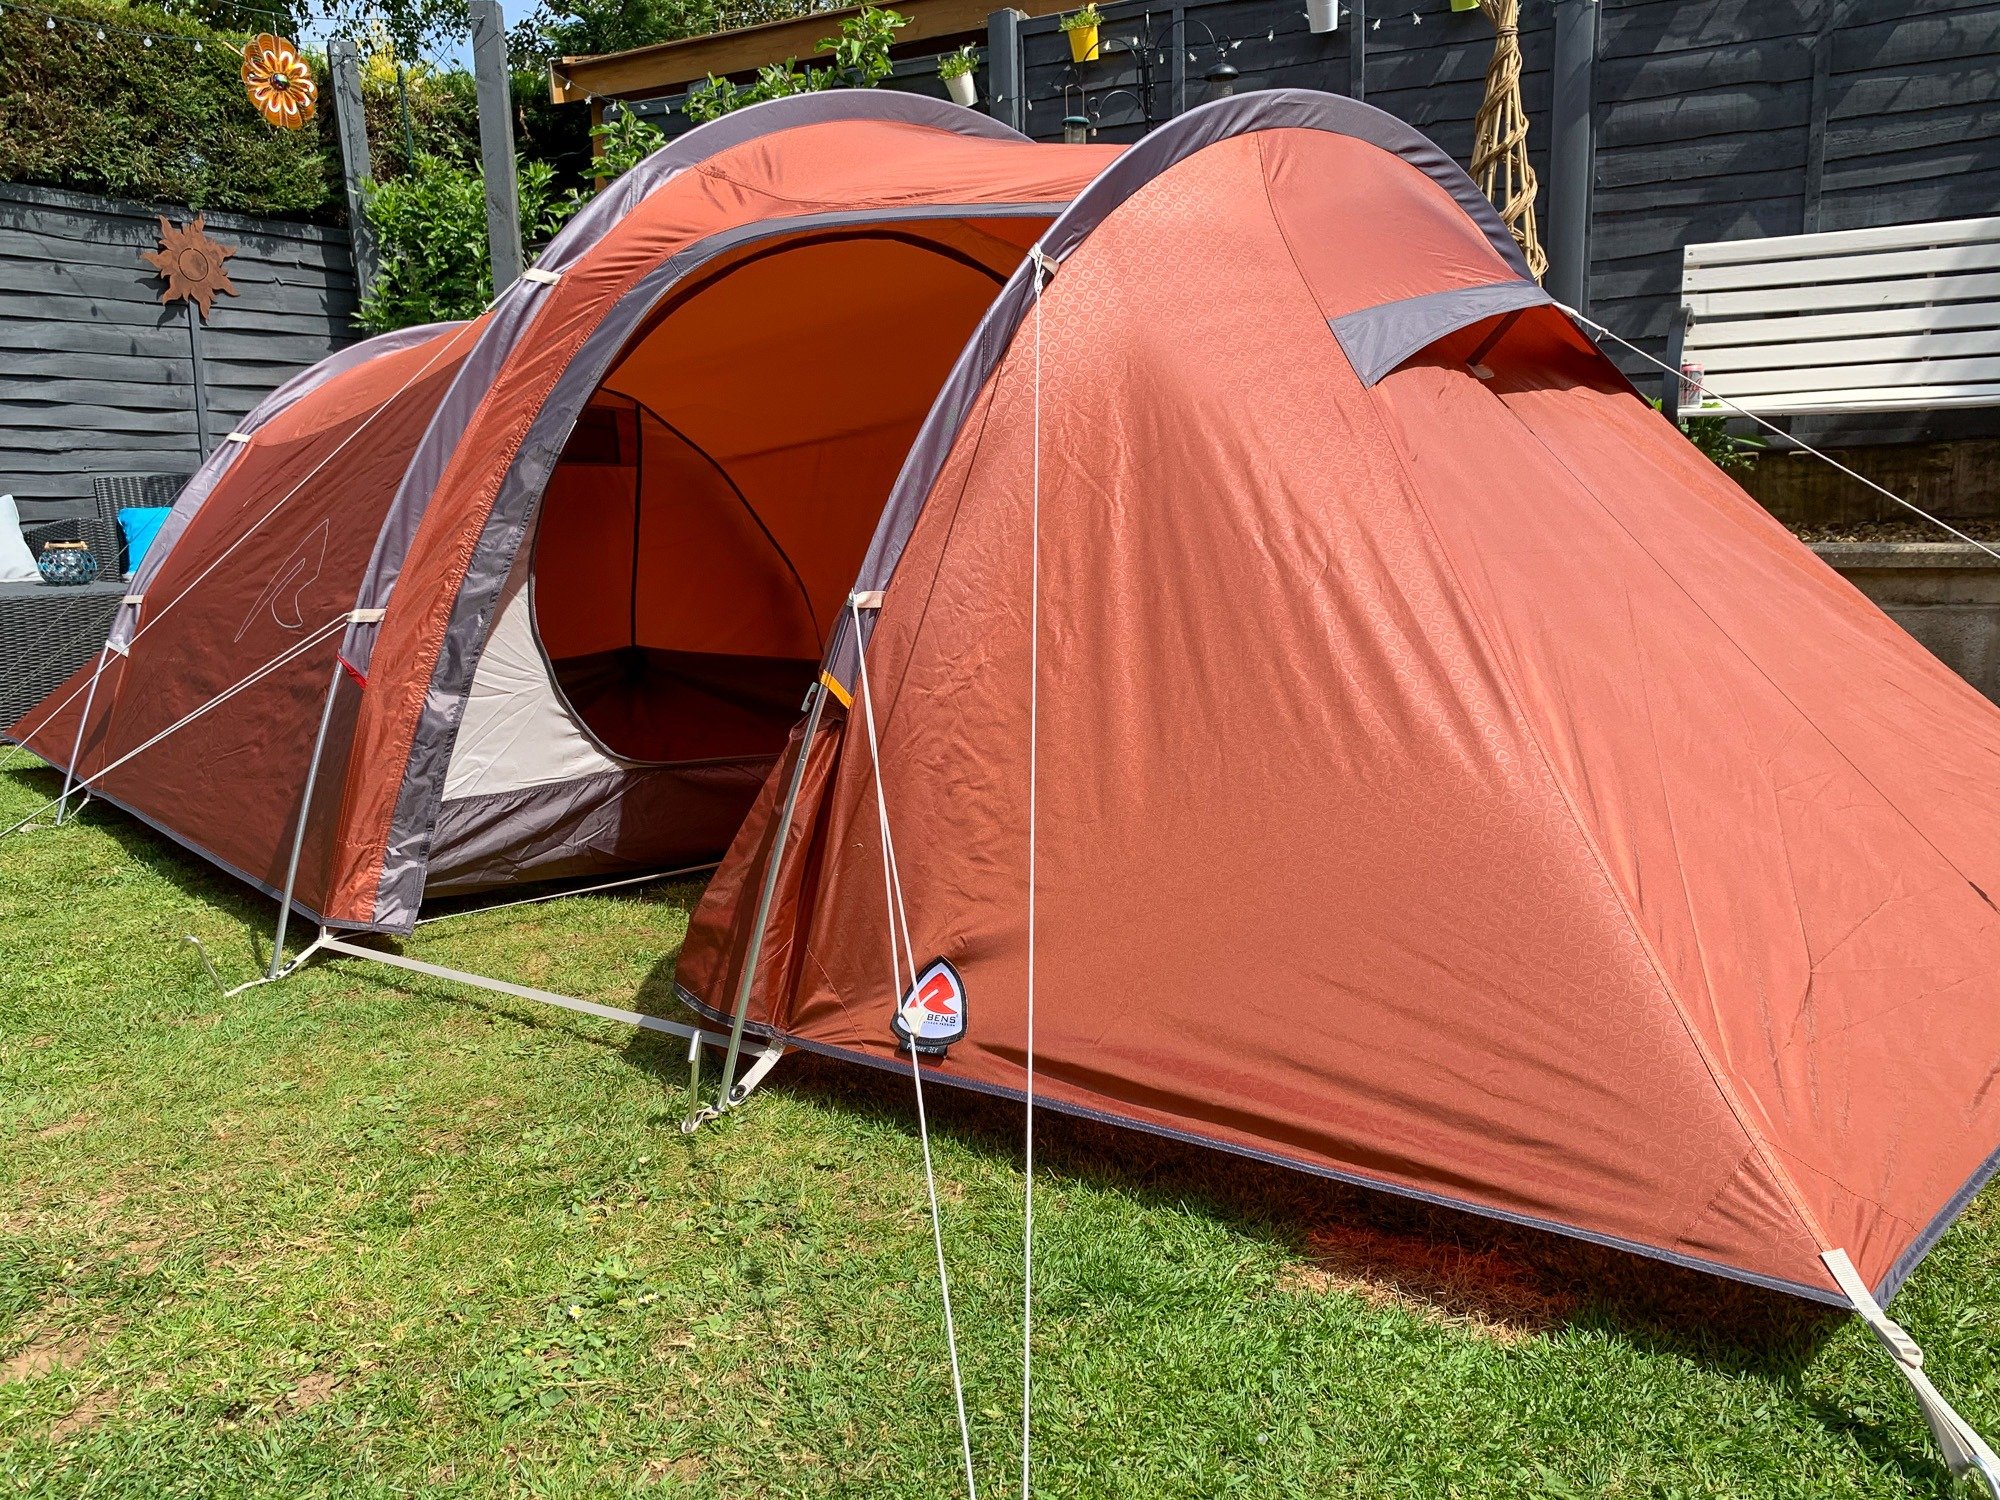 Tent Pitched with Door Open